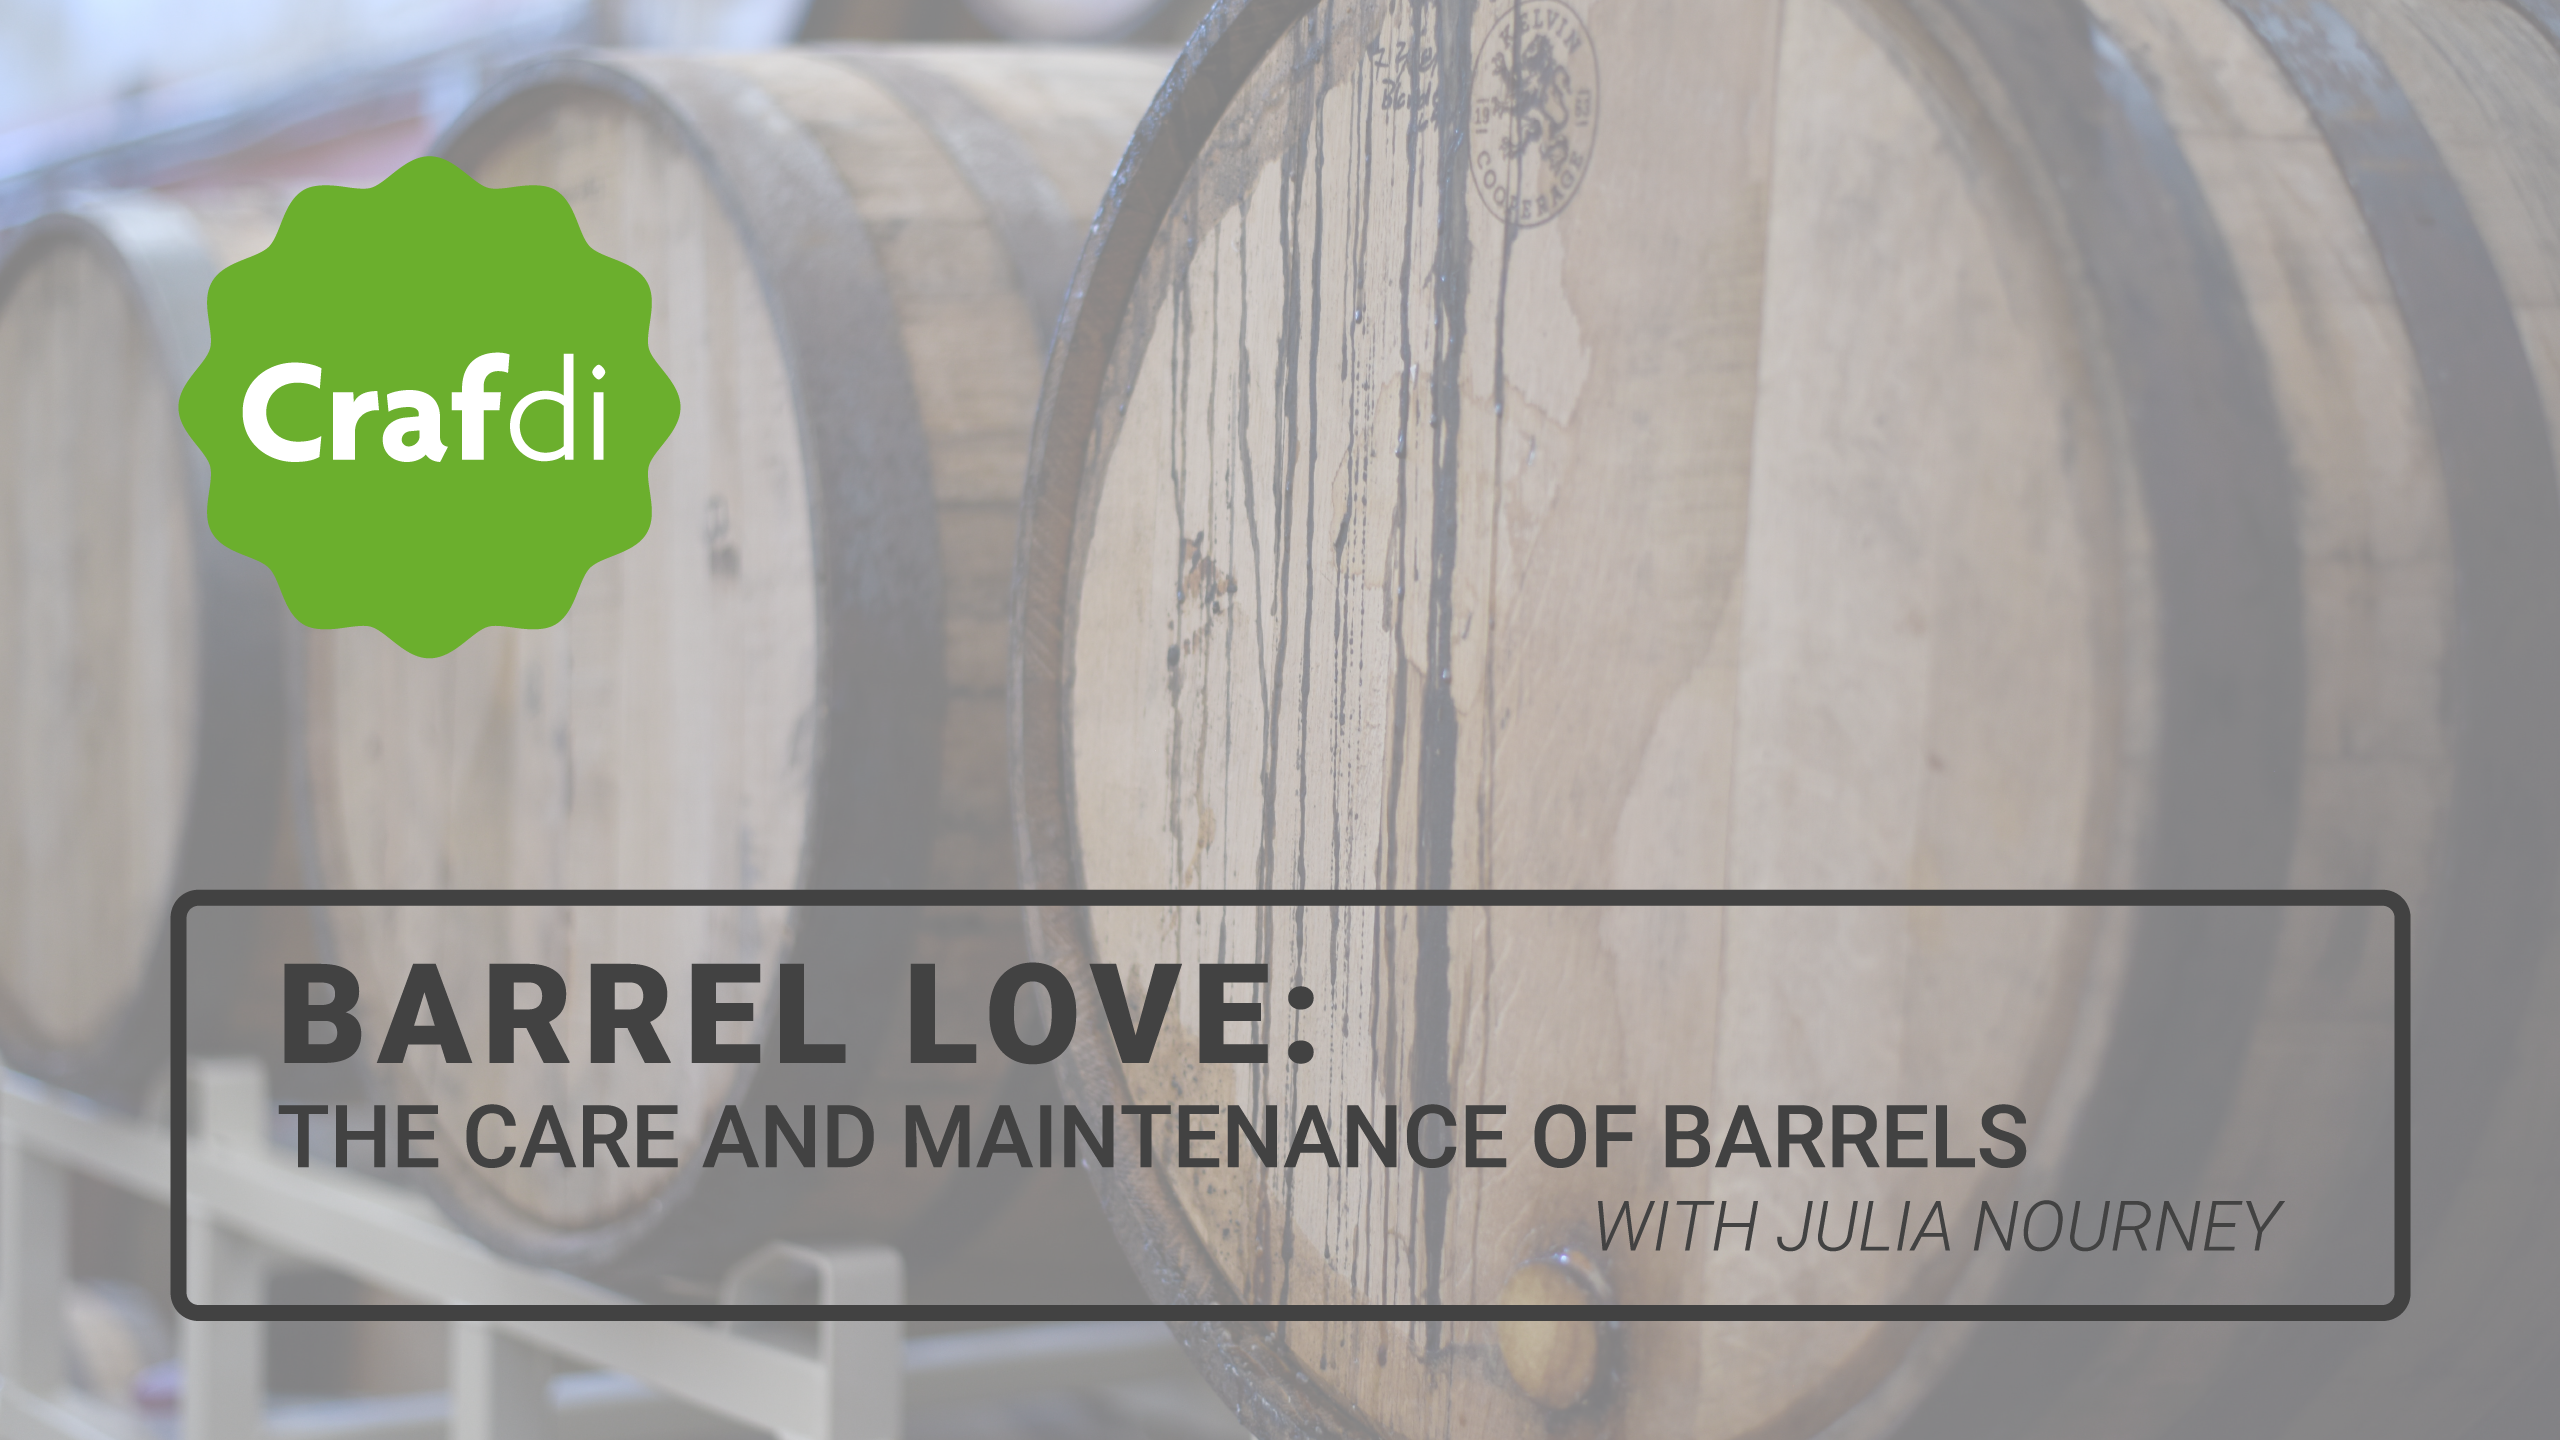 Barrel Love: The Care and Maintenance of Barrels with Julia Nourney